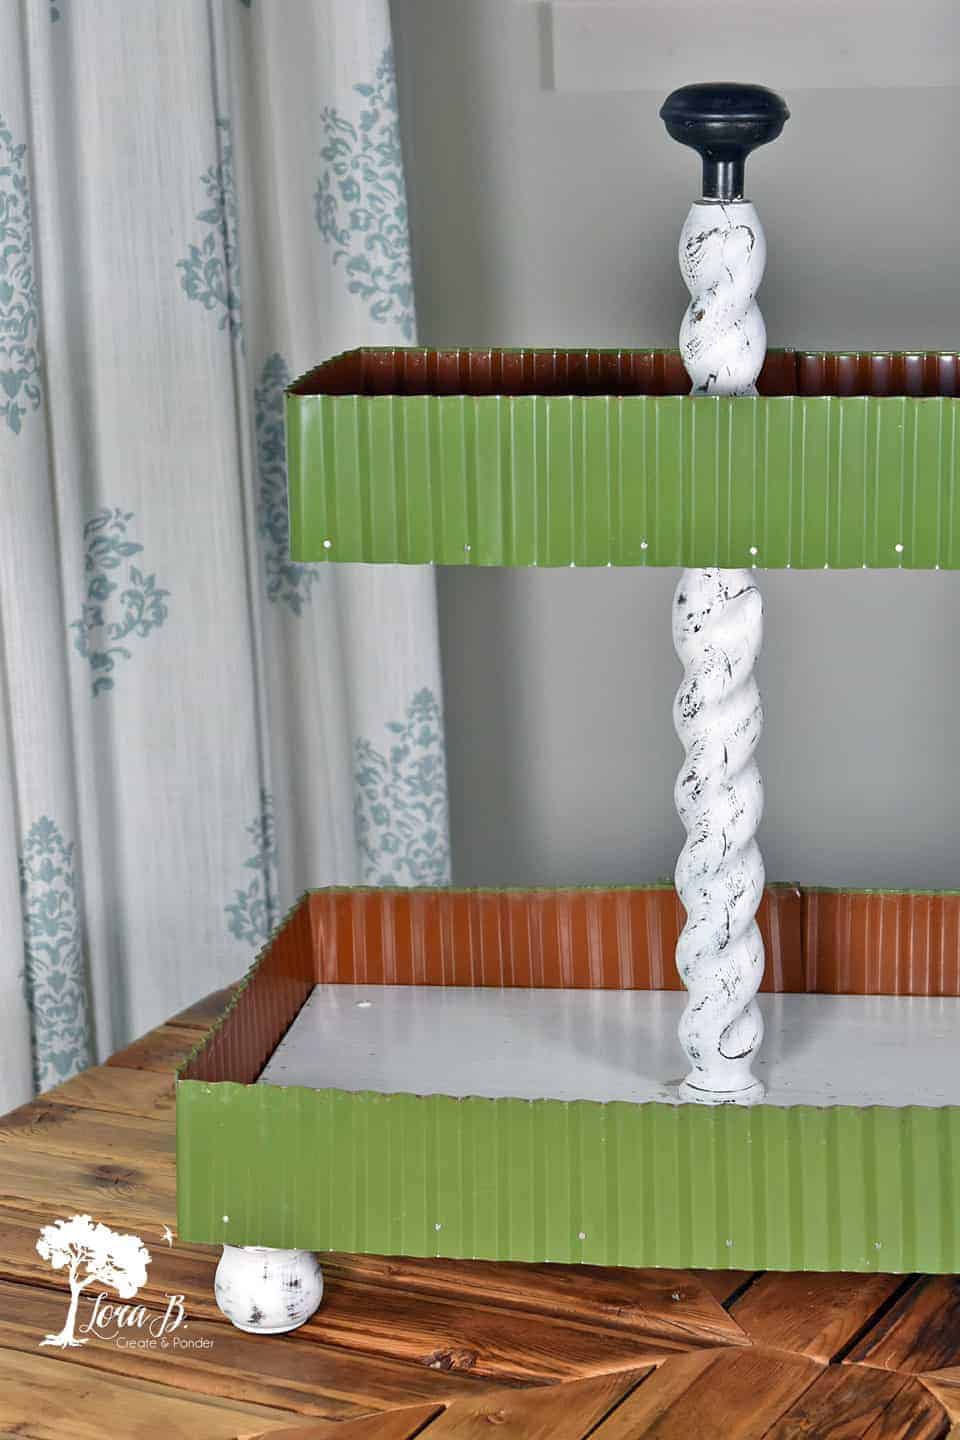 DIY a Junk Styled Tiered Tray